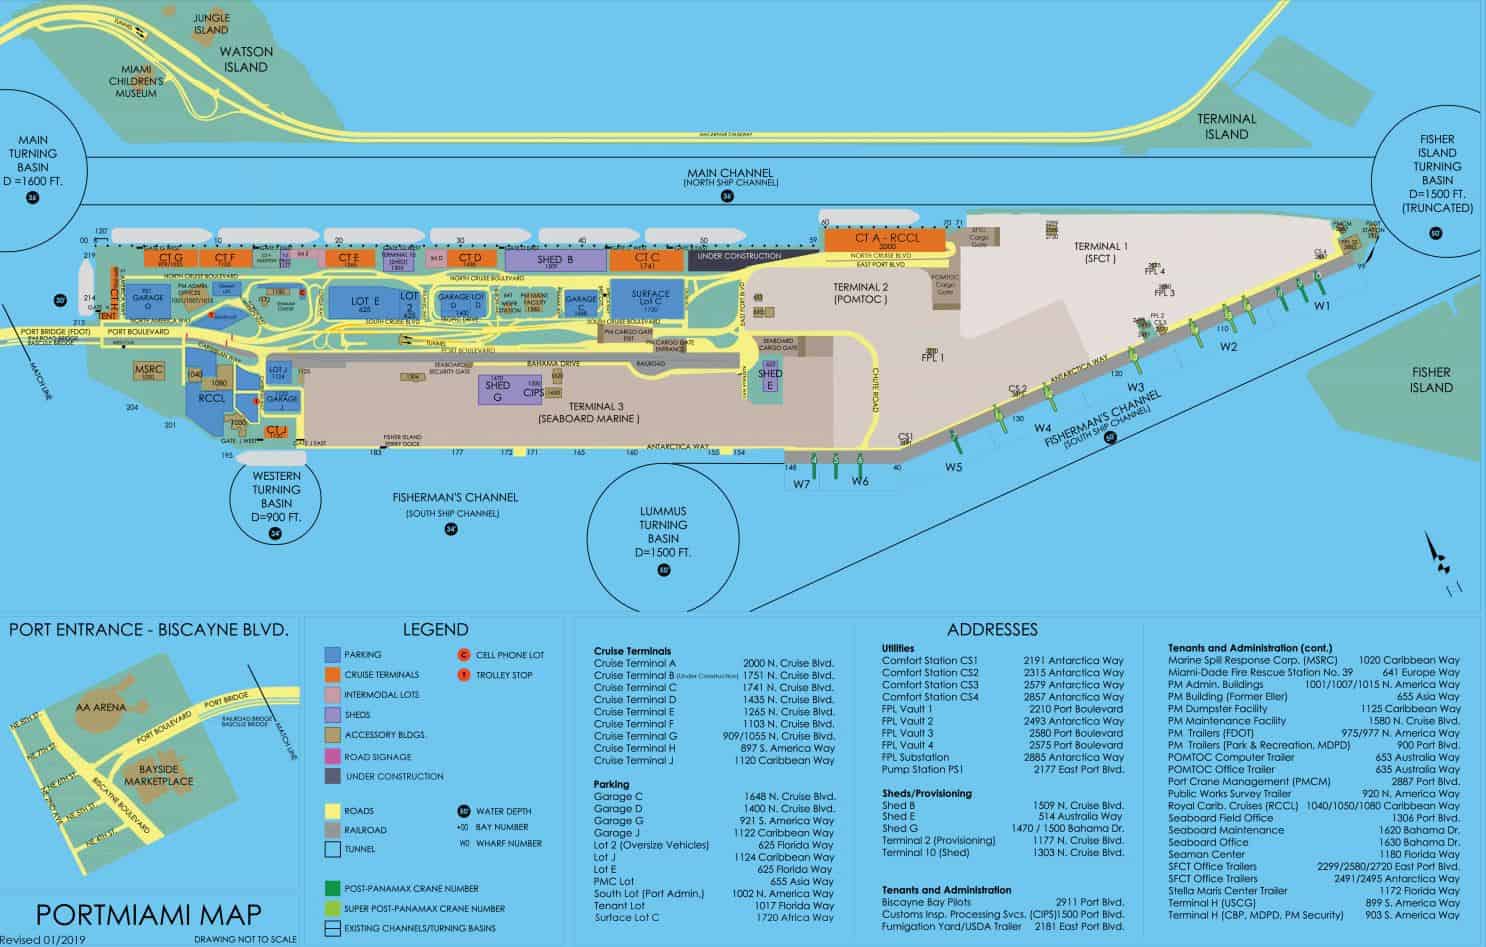 Miami Cruise Terminal Guide: What You Need to Know (2021)